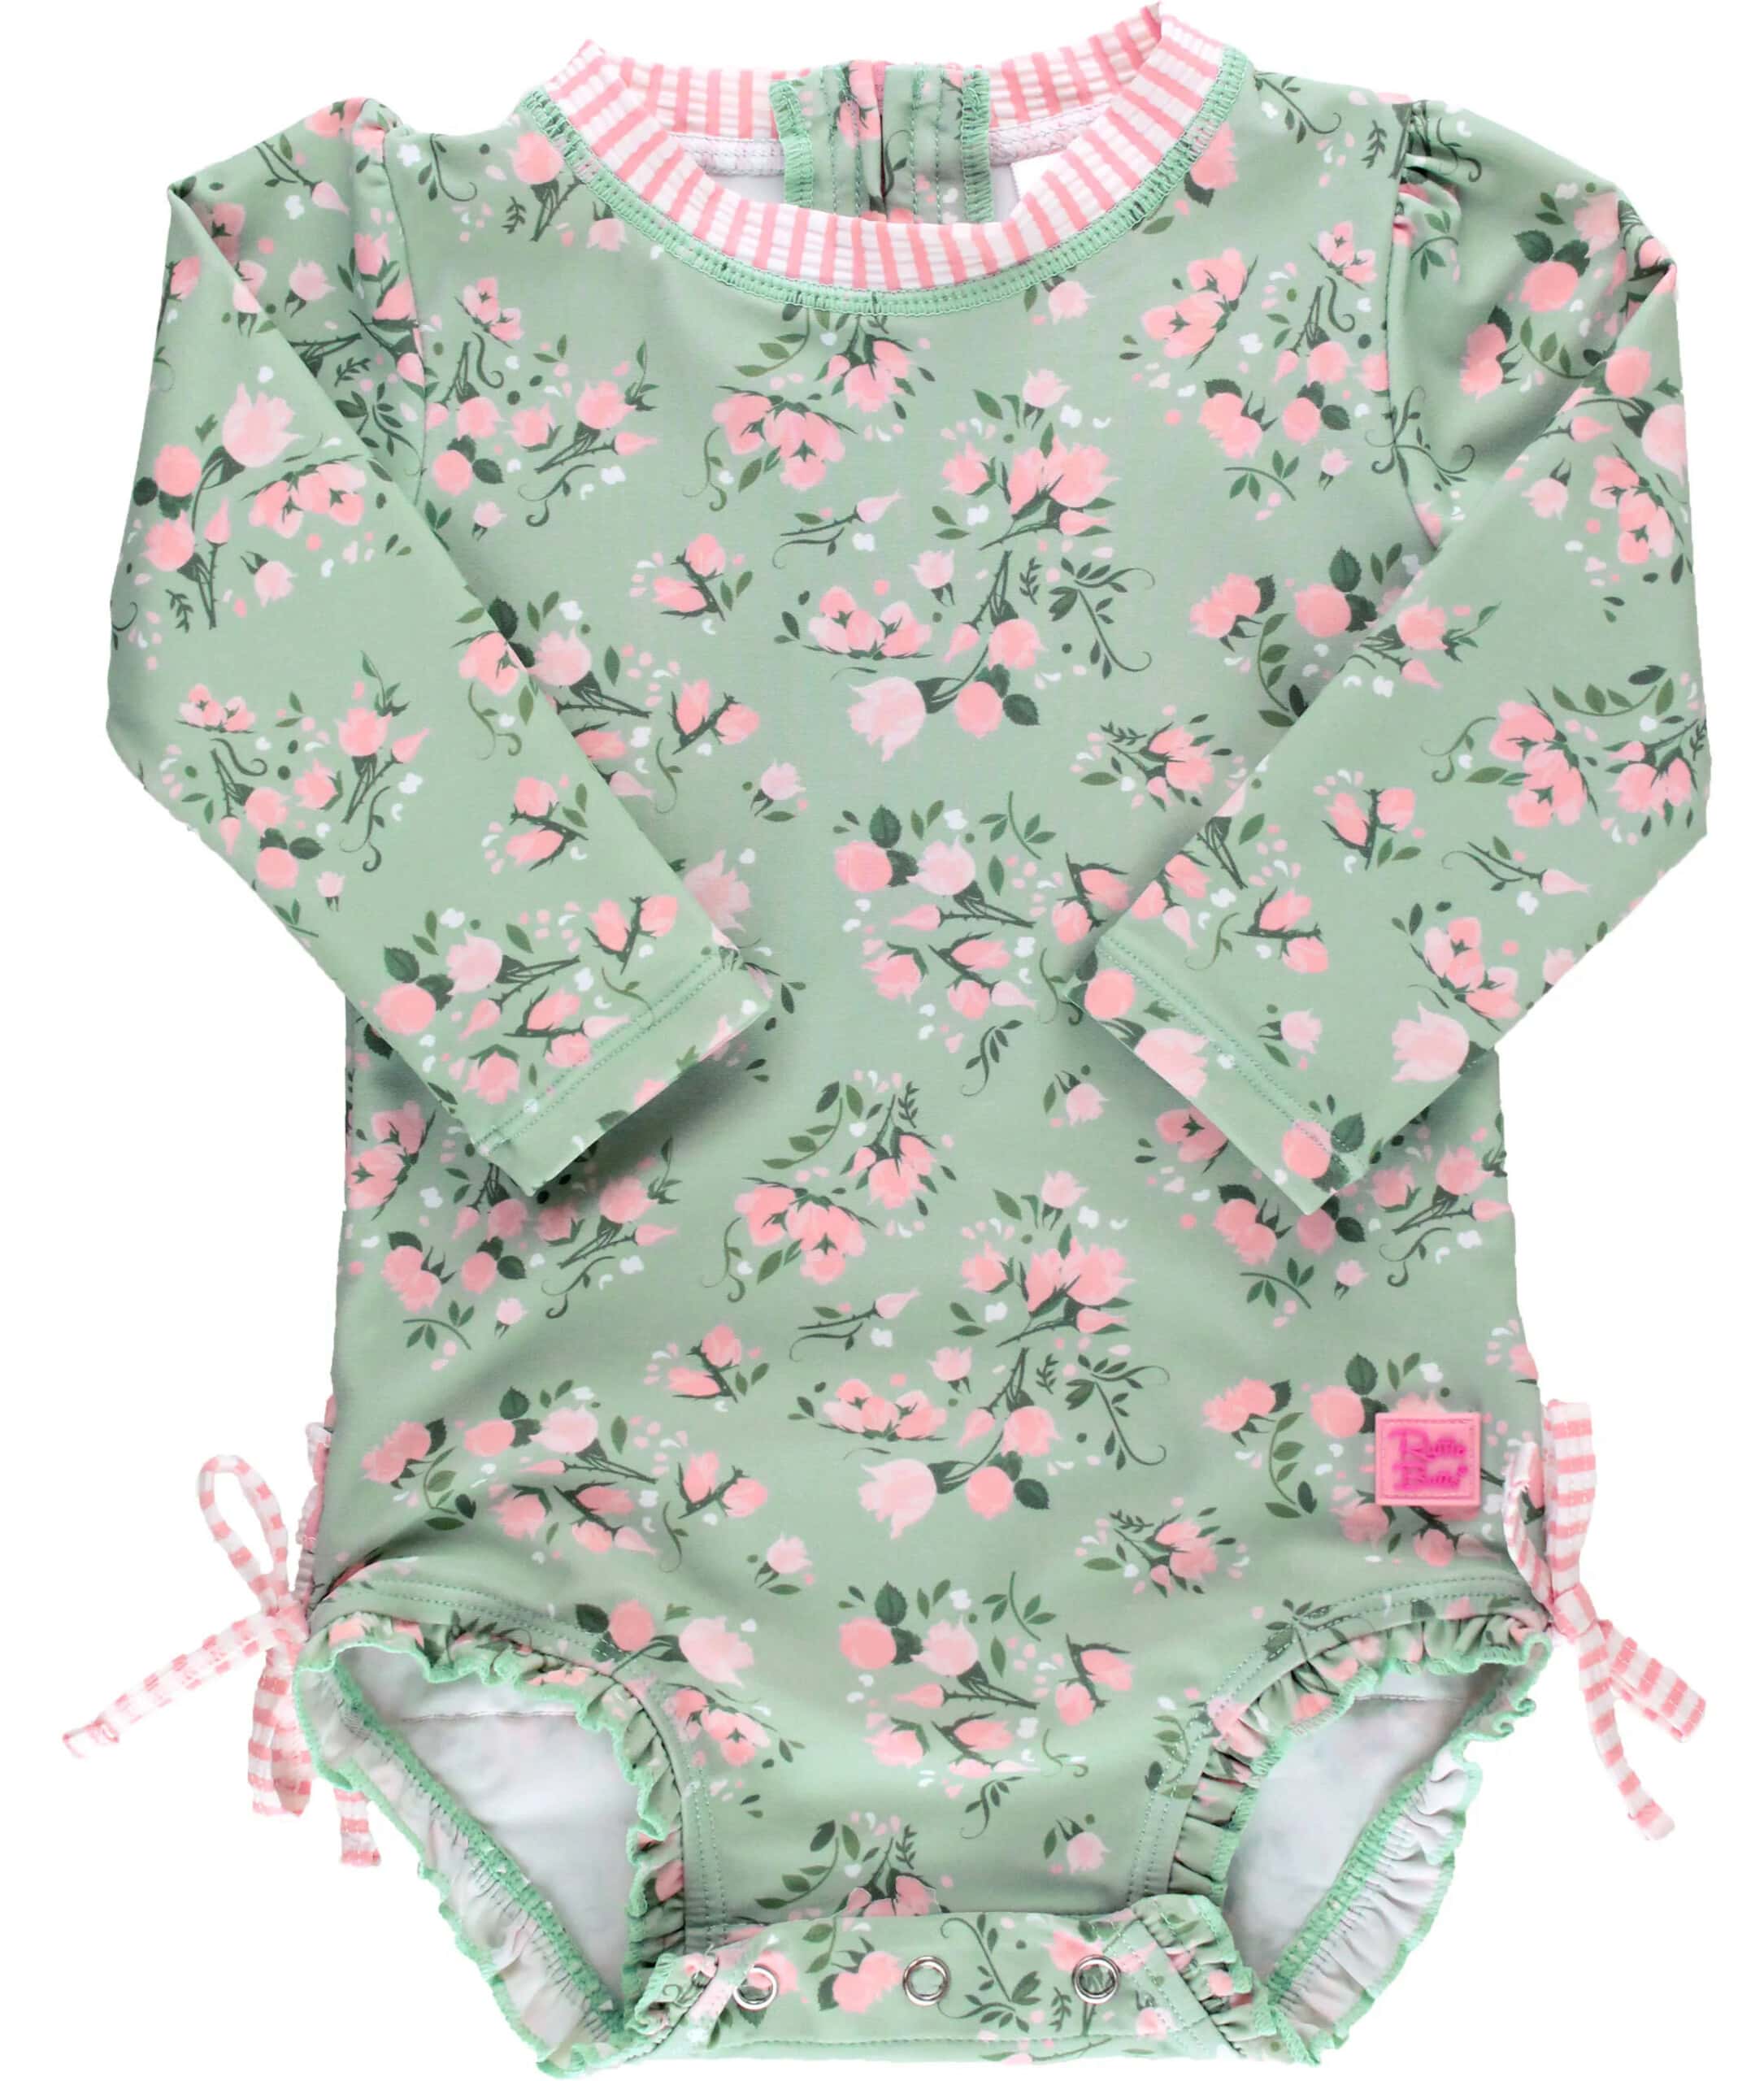 Green and pink floral print one-piece bathing suit 